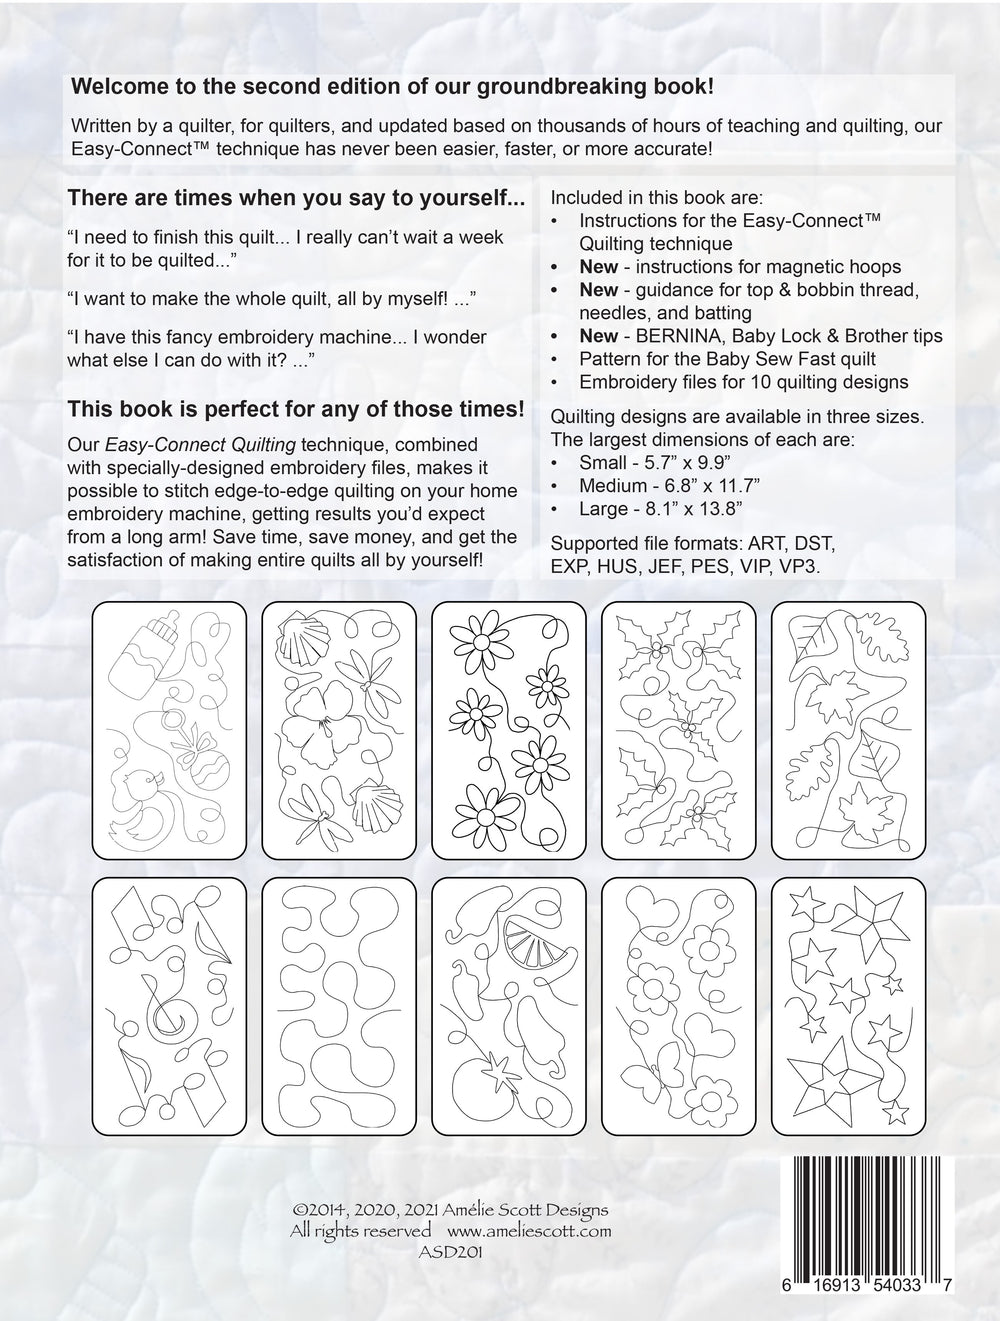 Edge-2-Edge Quilting on Your Embroidery Machine Guidebook